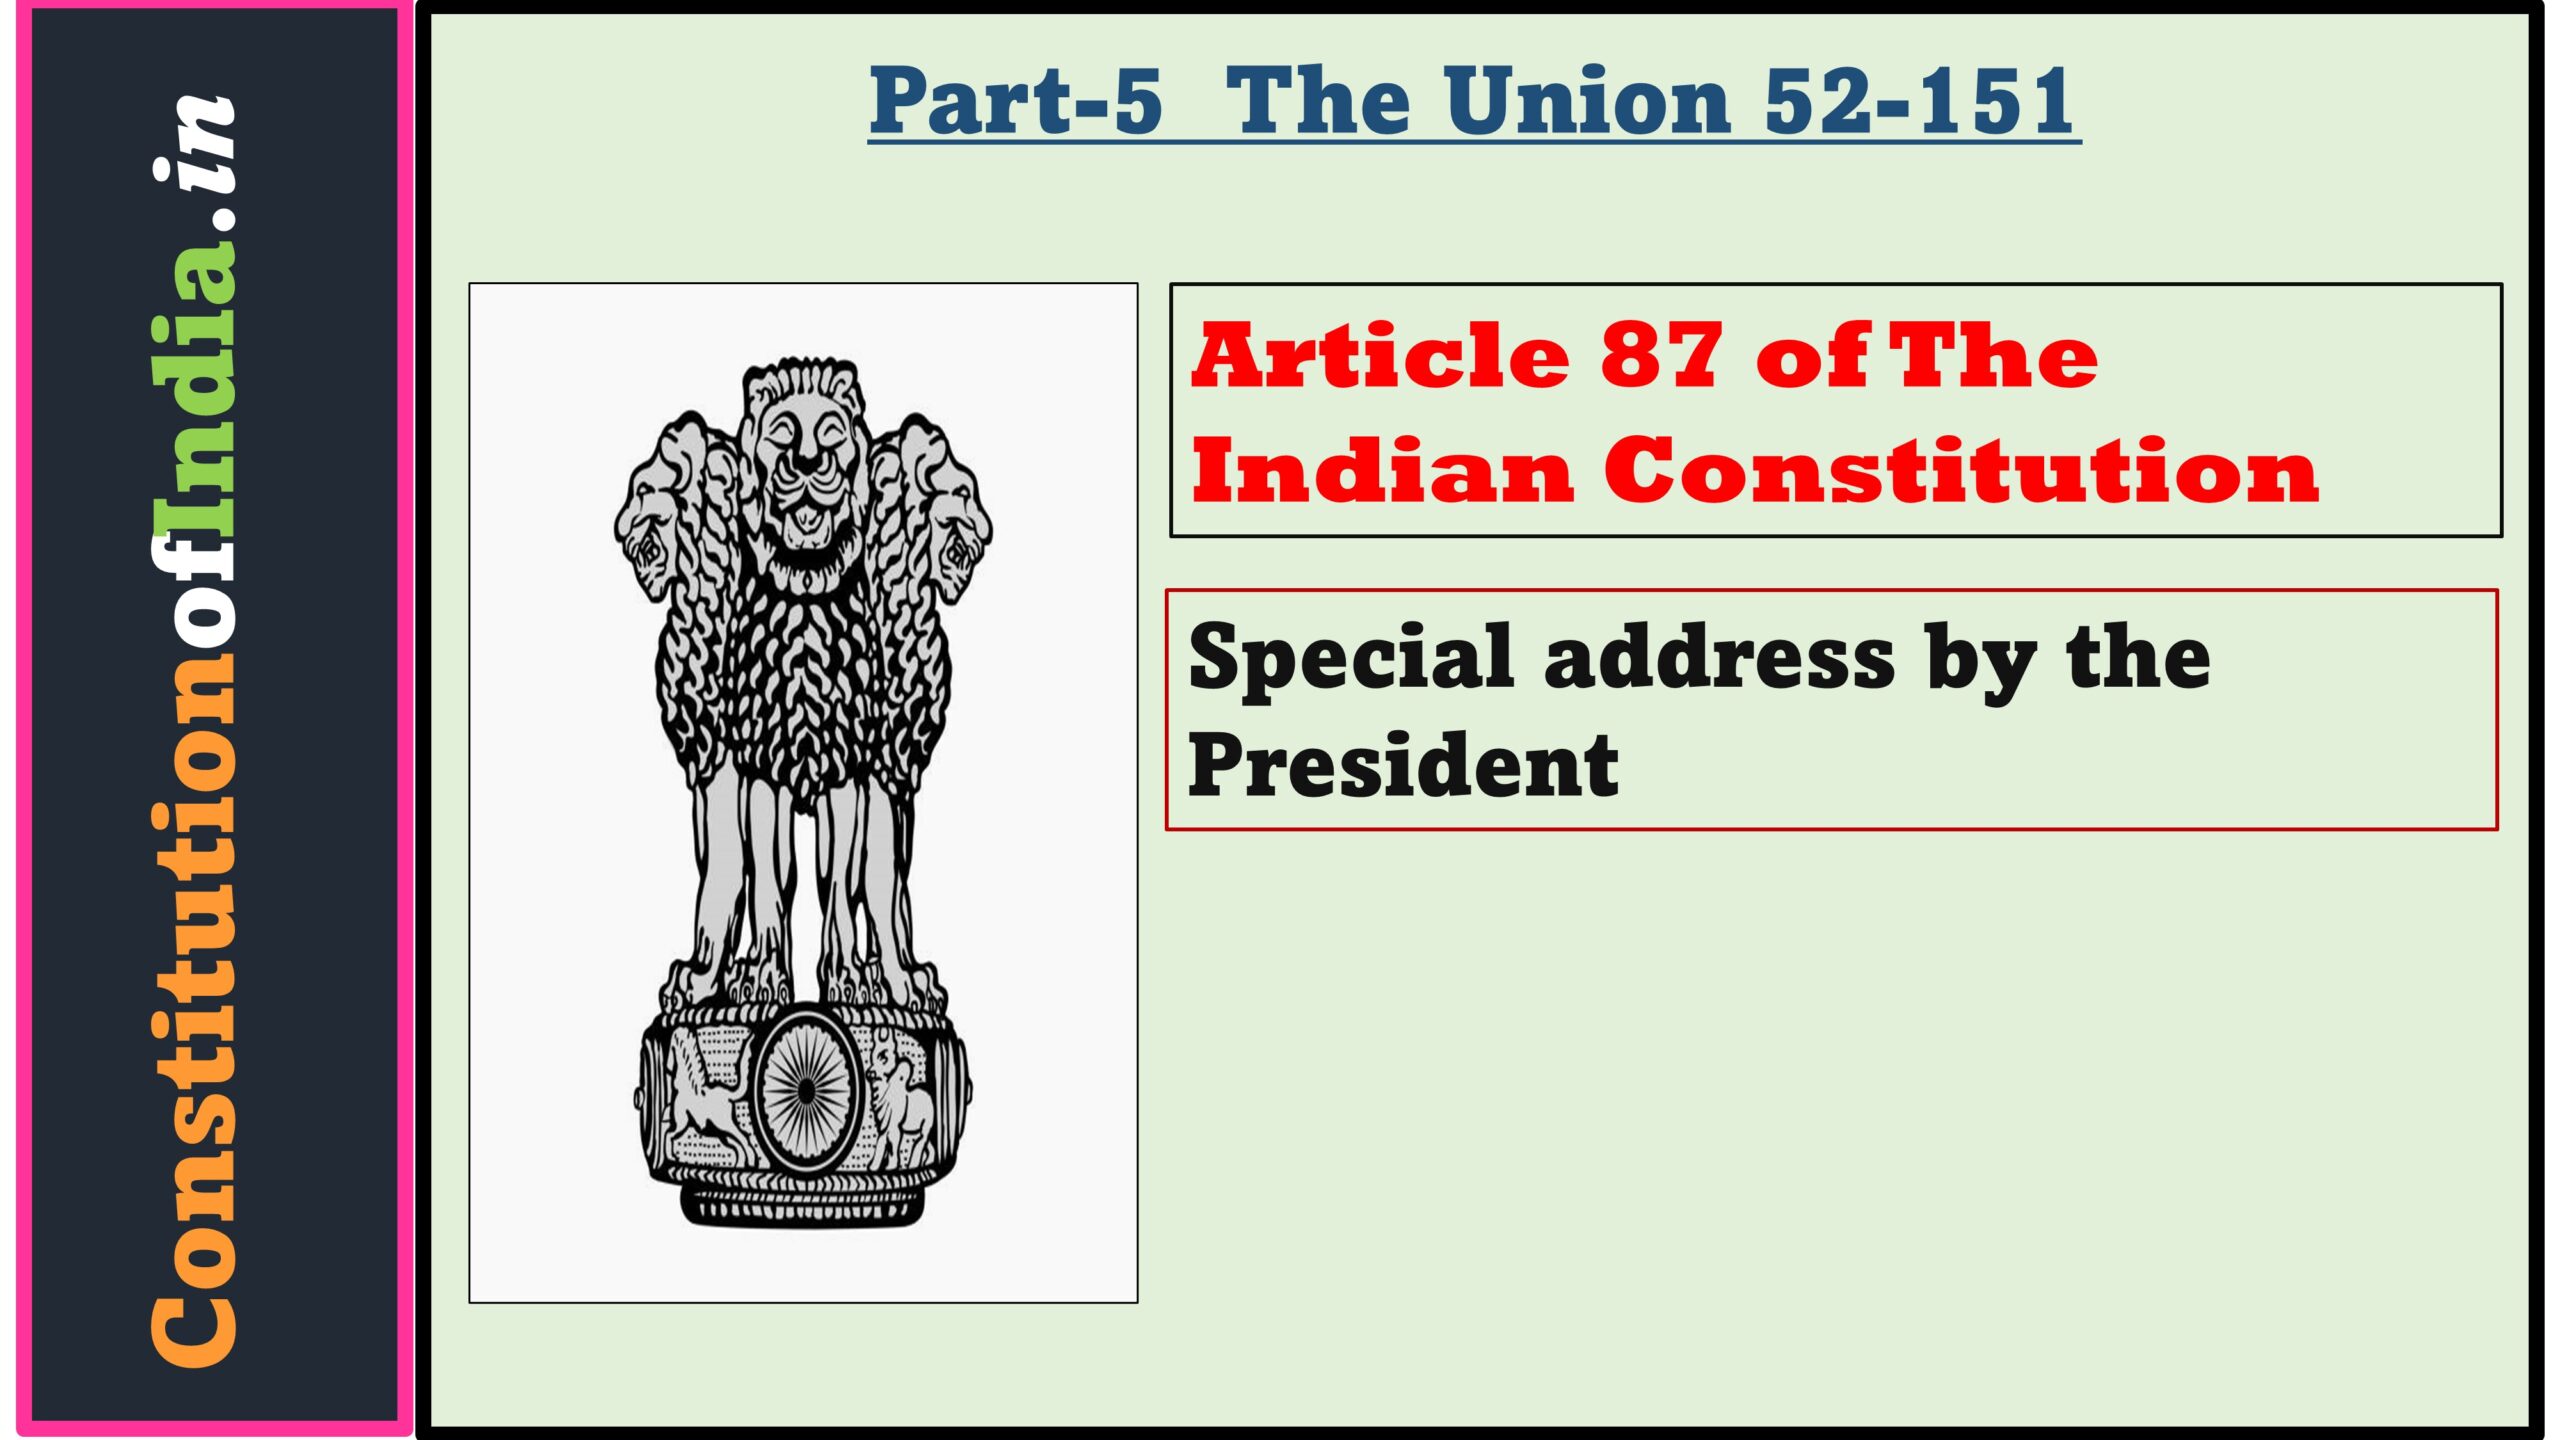 Article 87 of The Indian Constitution